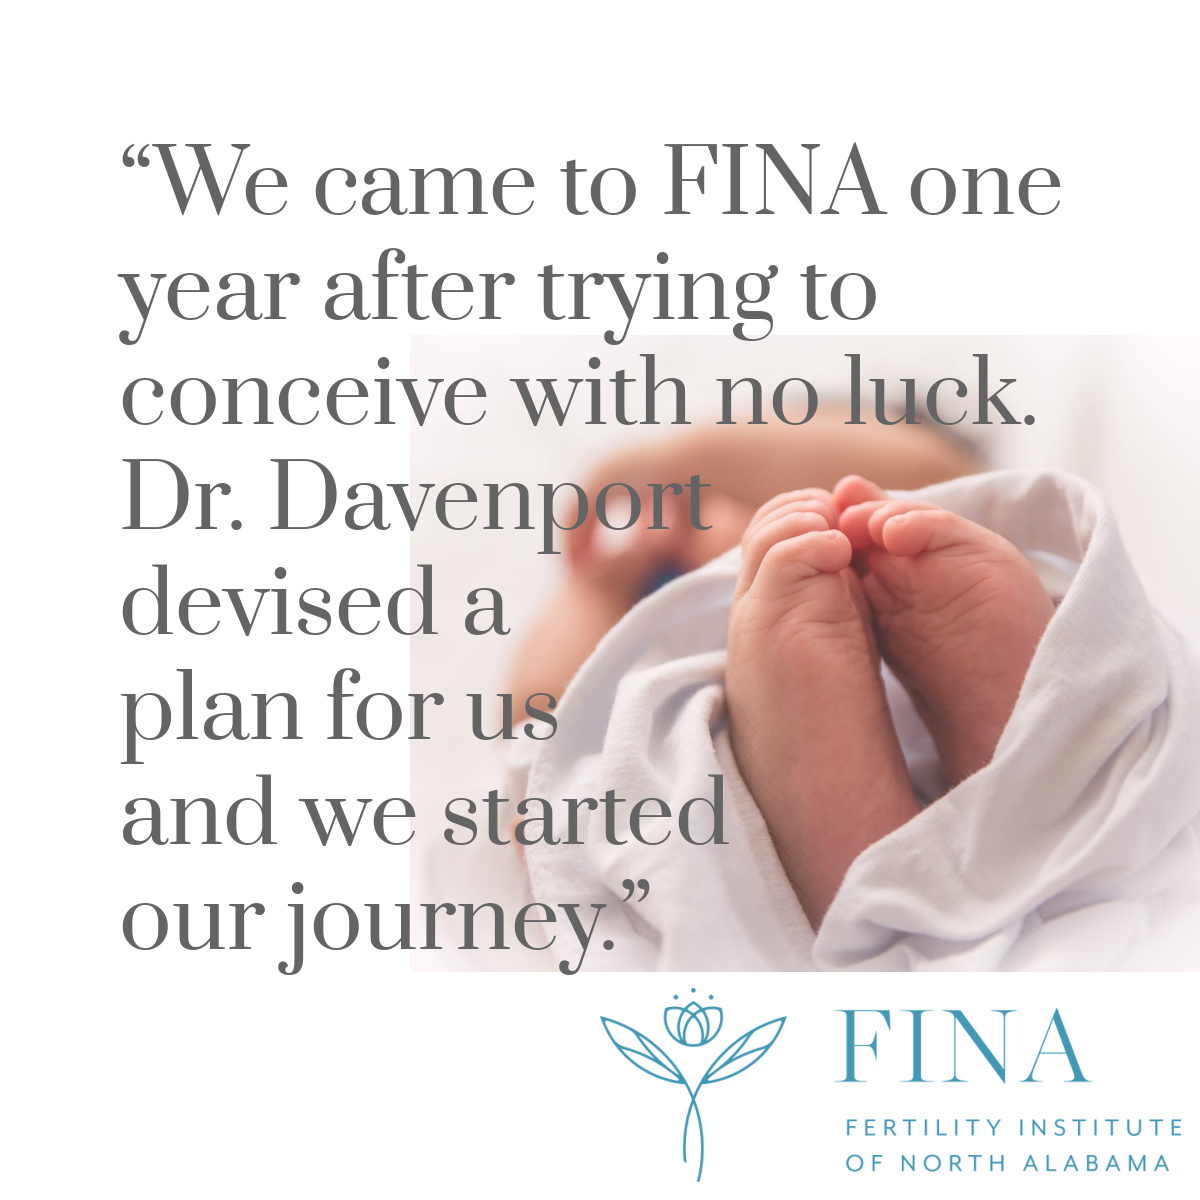 One patient’s FINA story 💕